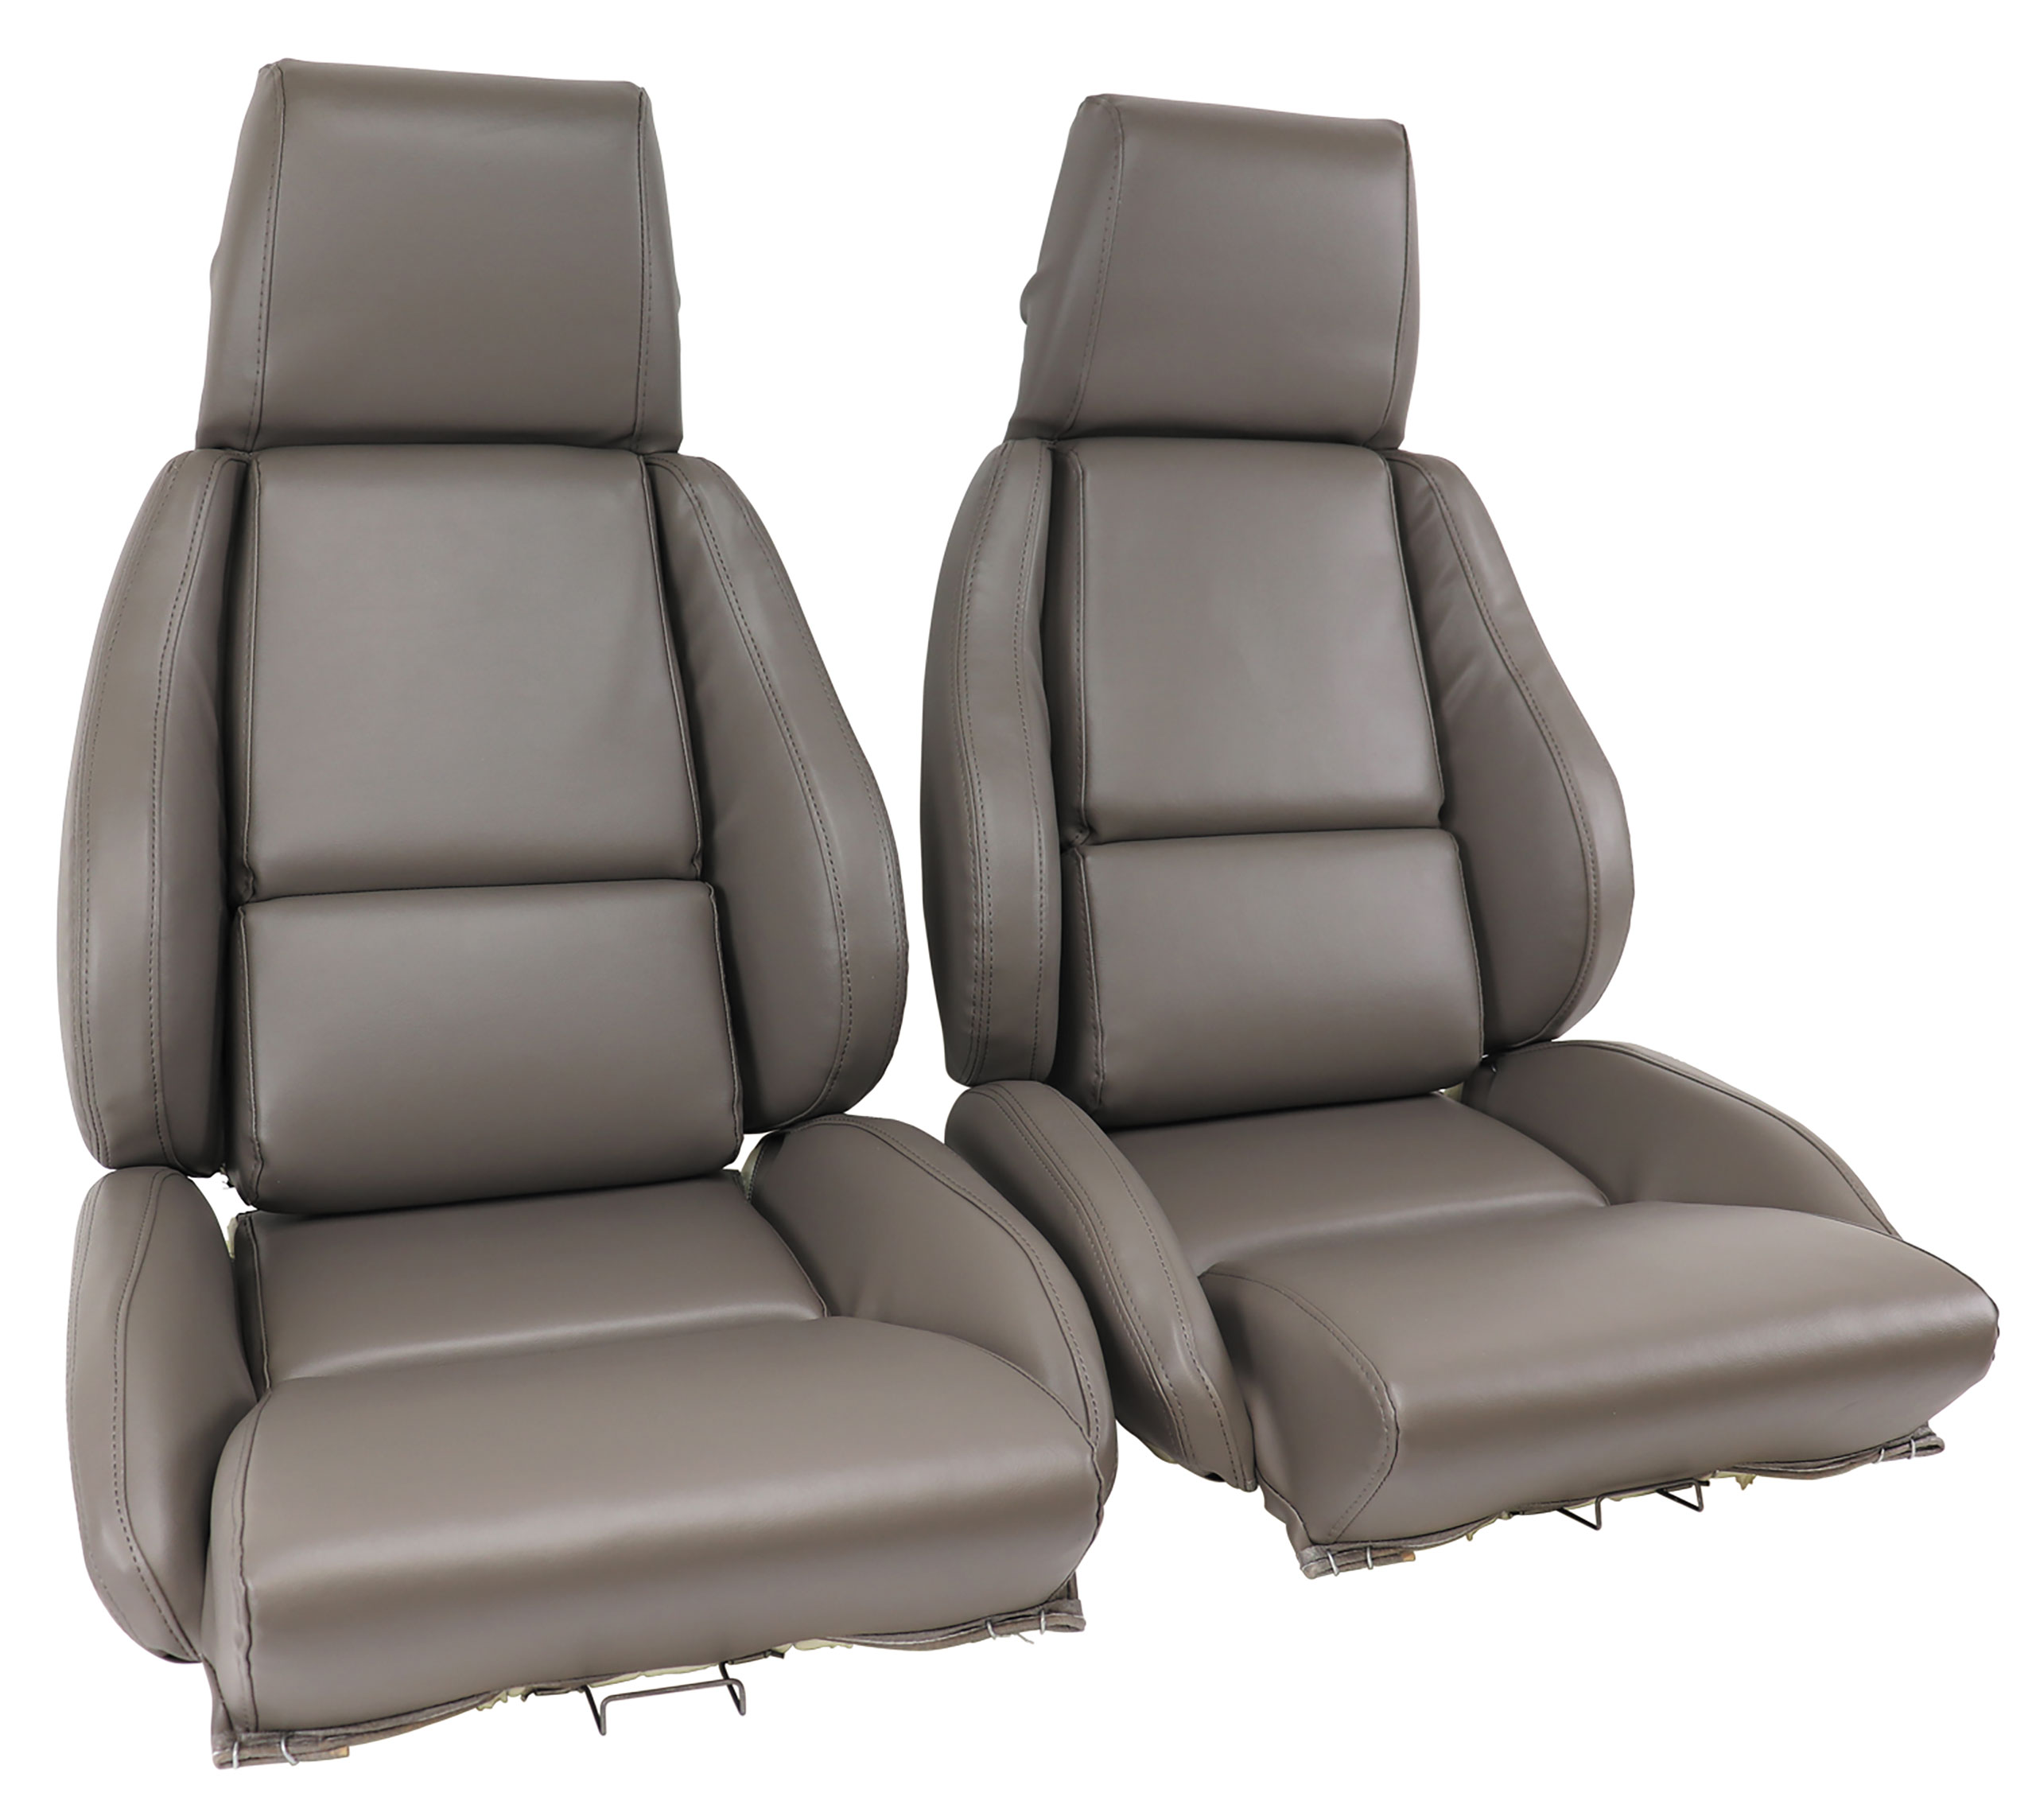 88 Corvette C4 Mounted Leather-Like Vinyl Seat Covers Gray Standard No-Perforations CA-468879 